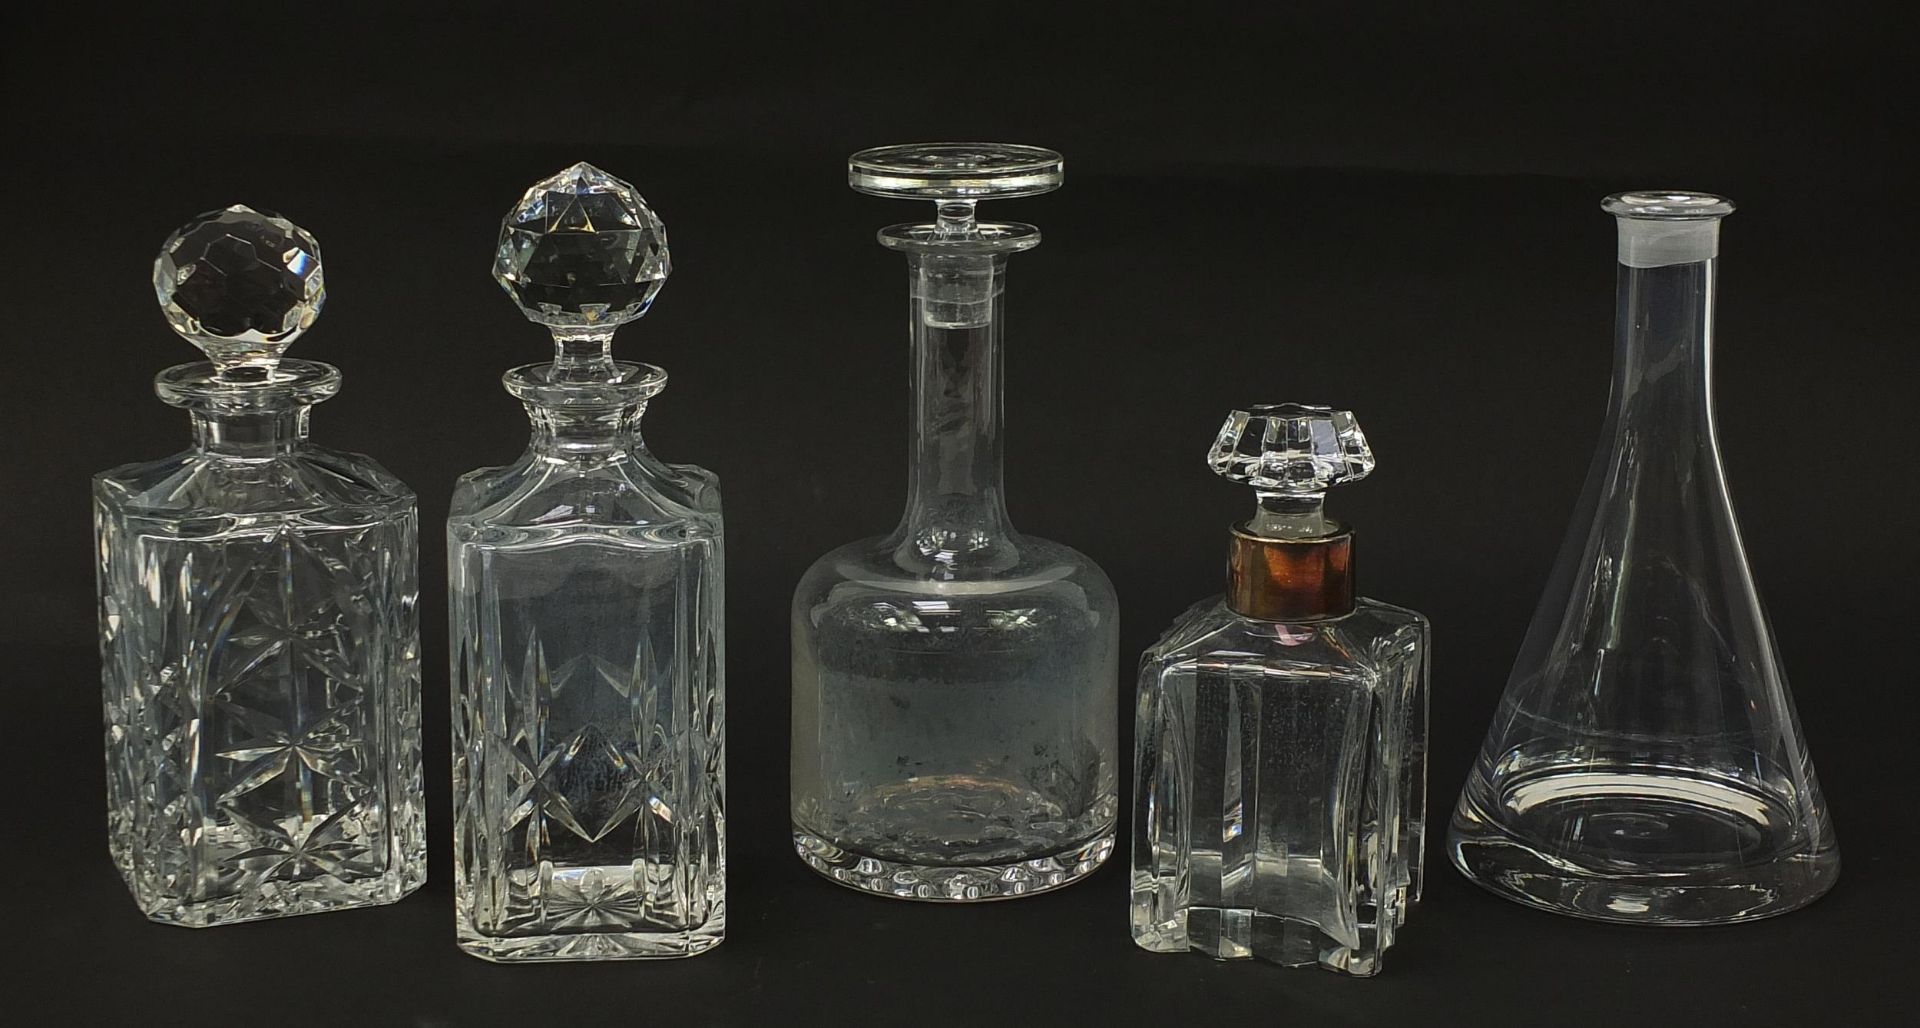 Five cut glass decanters including one with a silver plated collar and one Swedish design, the